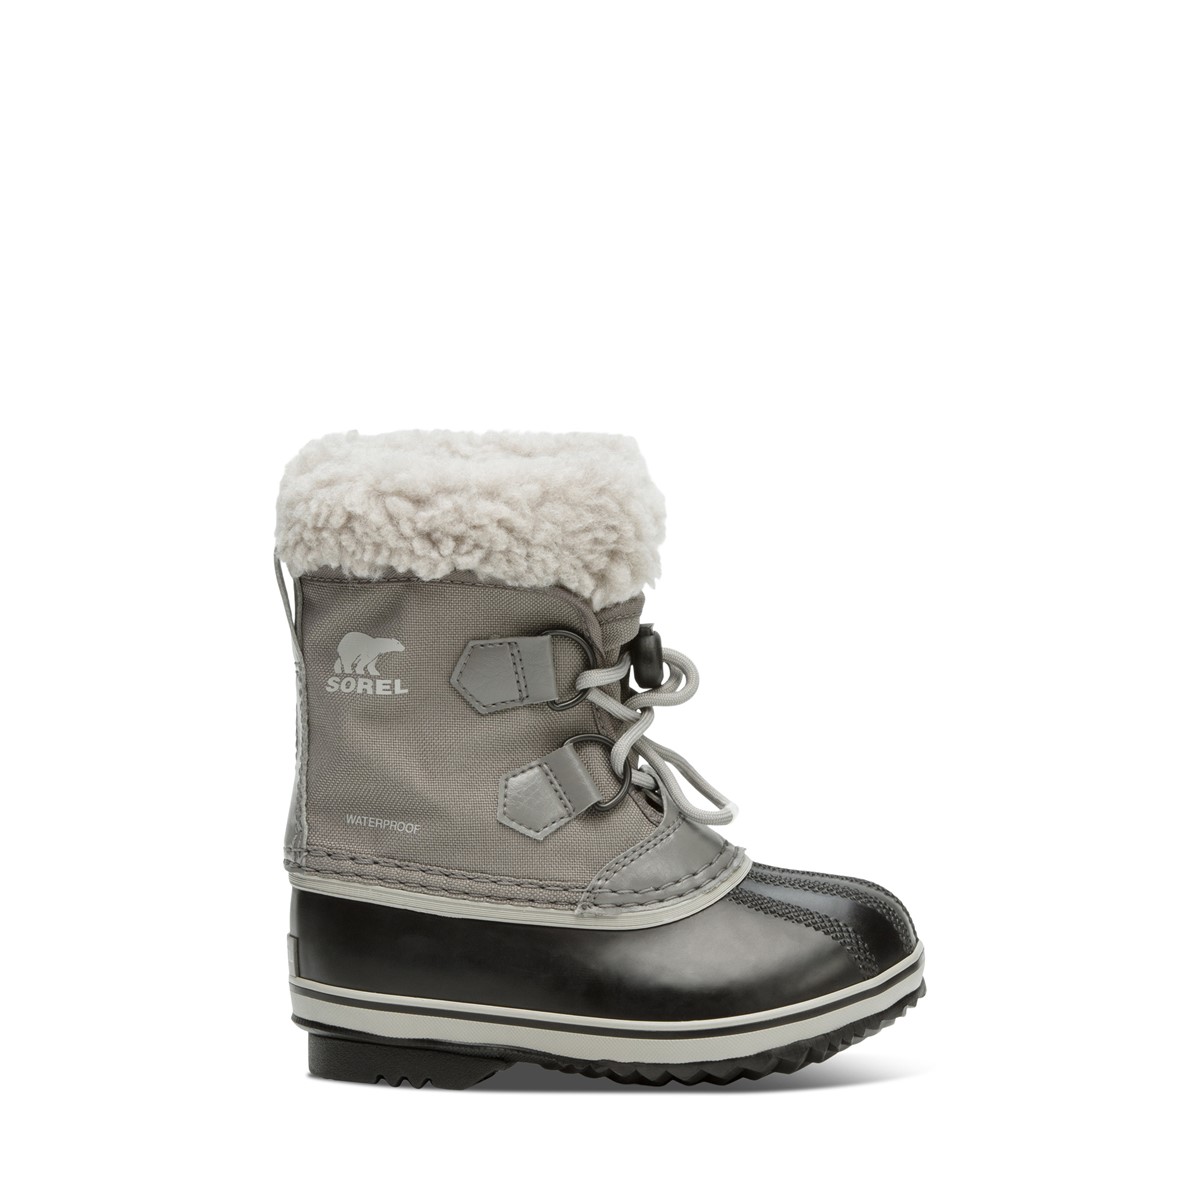 Toddler's Yoot Pac TP WP Winter Boots in Grey